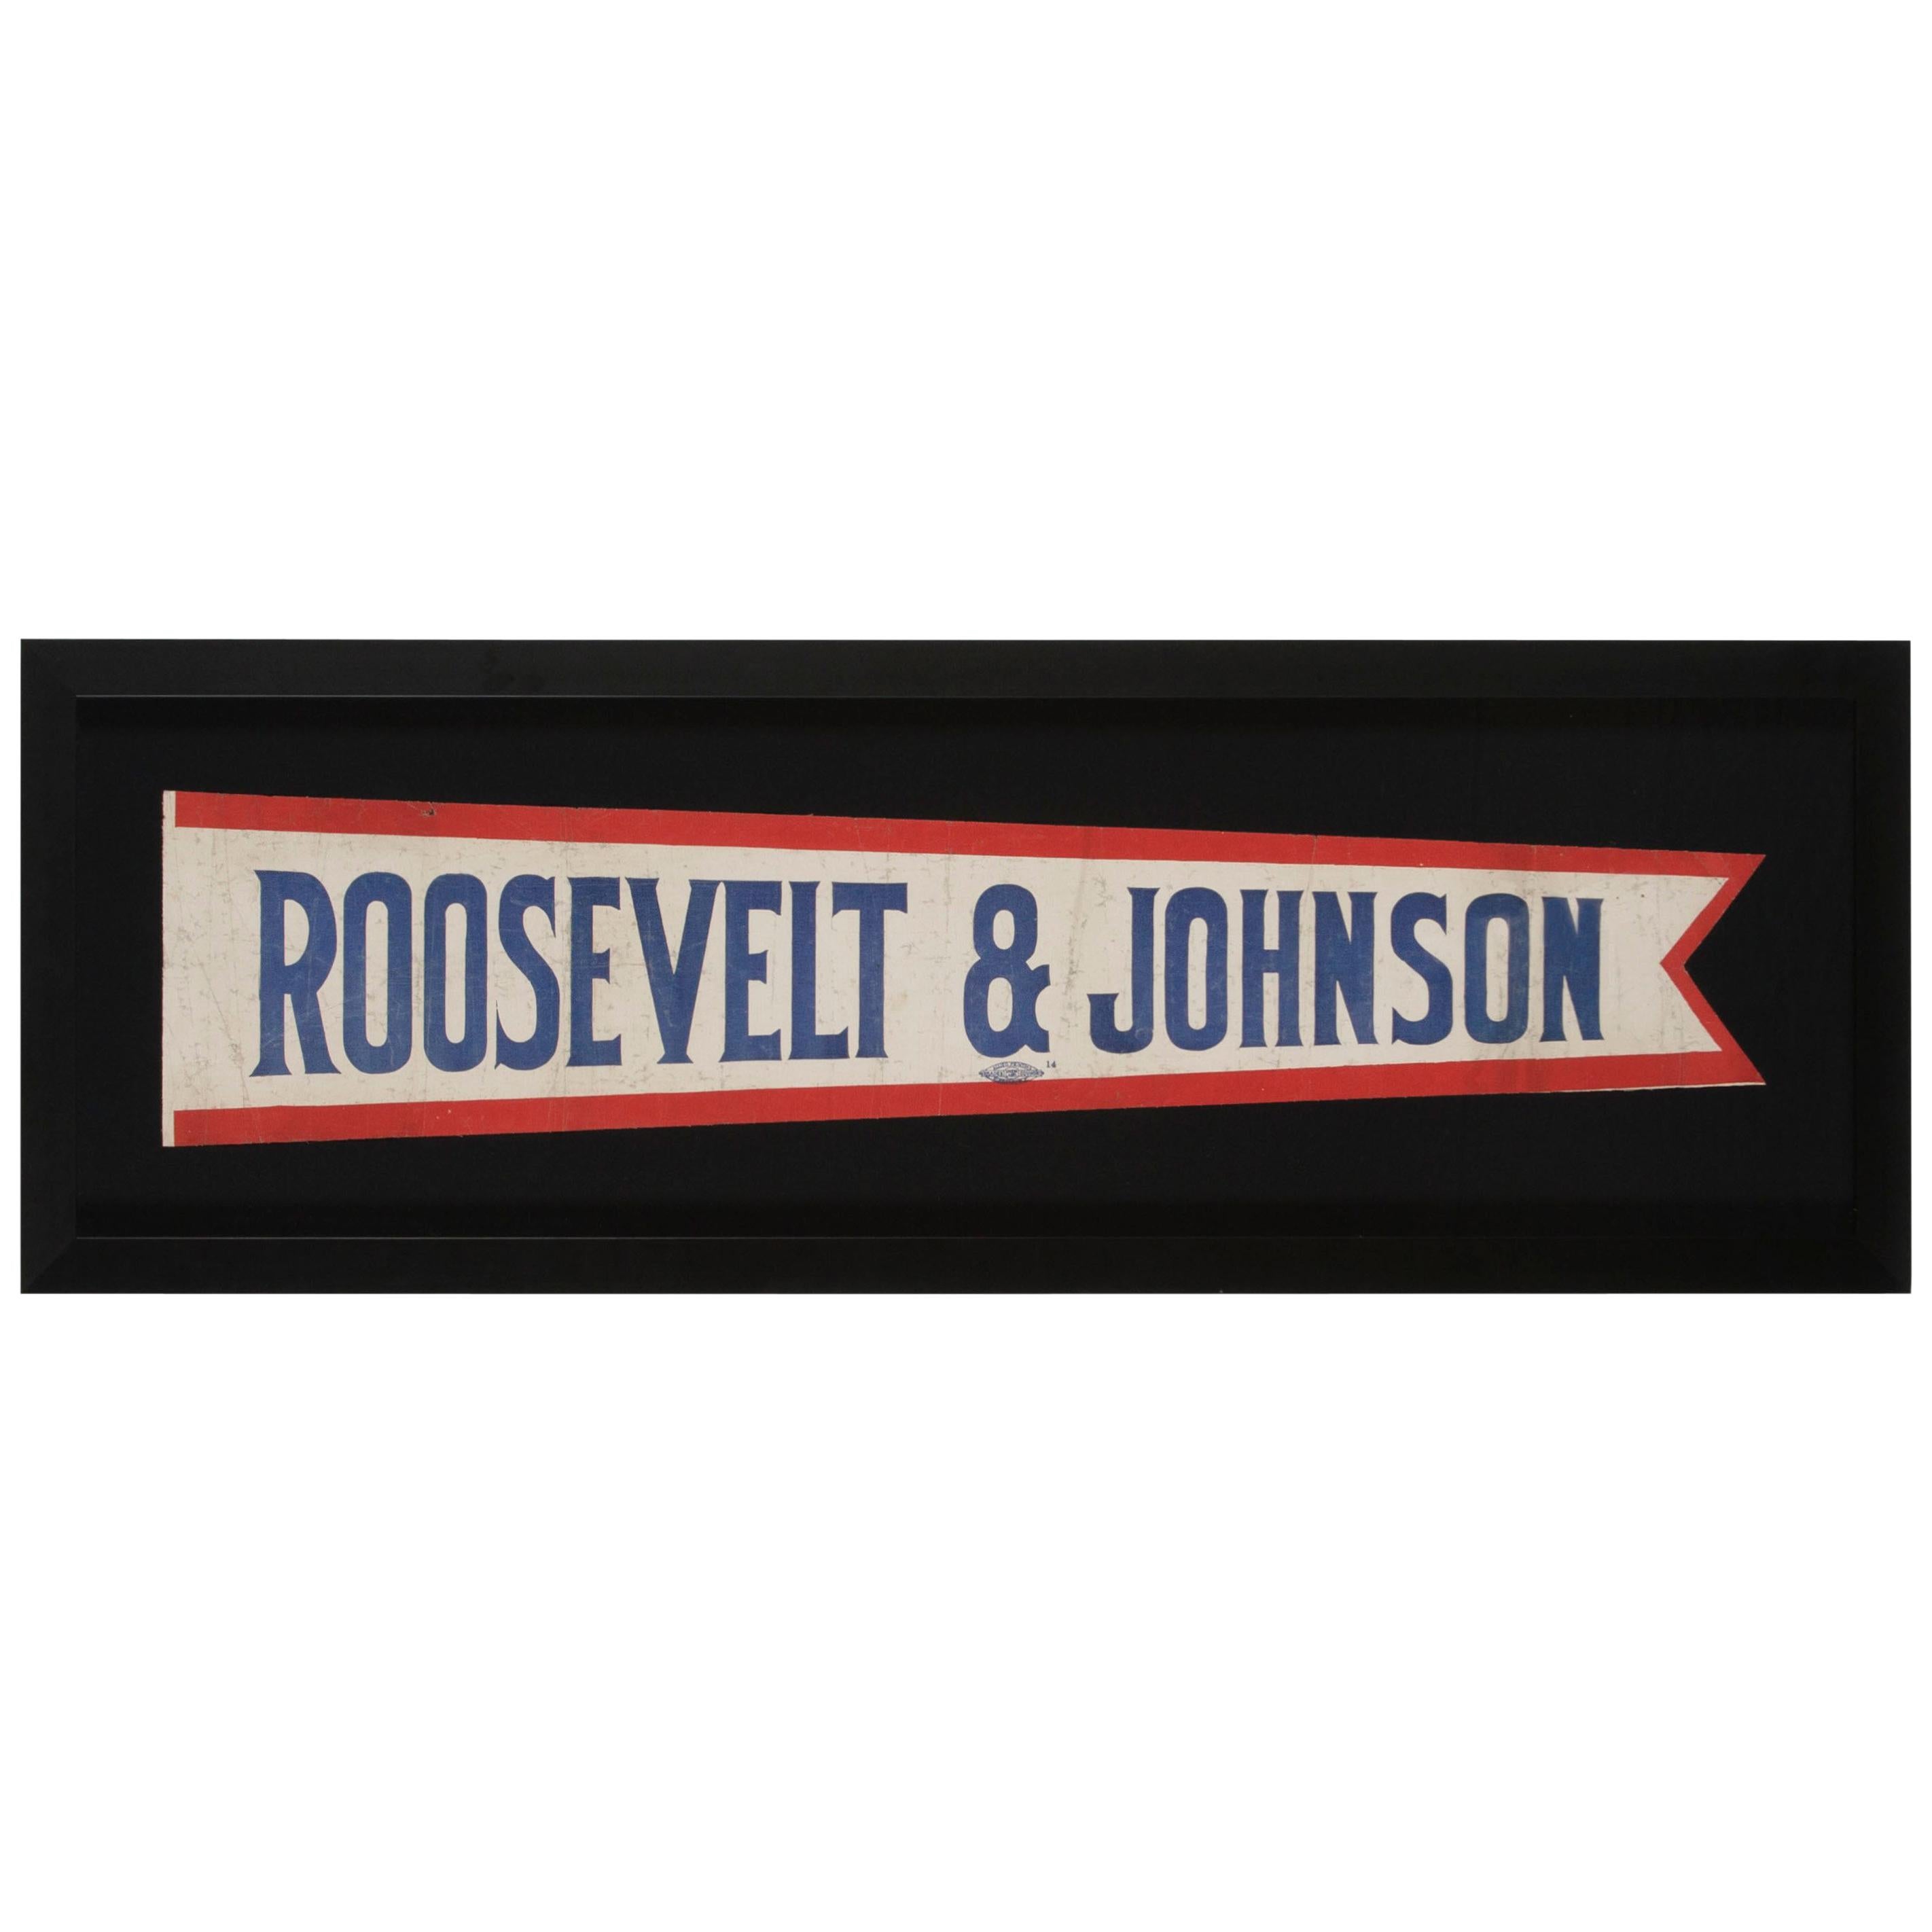 Elongated Pennant Made for the 1912 Presidential Campaign of Roosevelt & Johnson